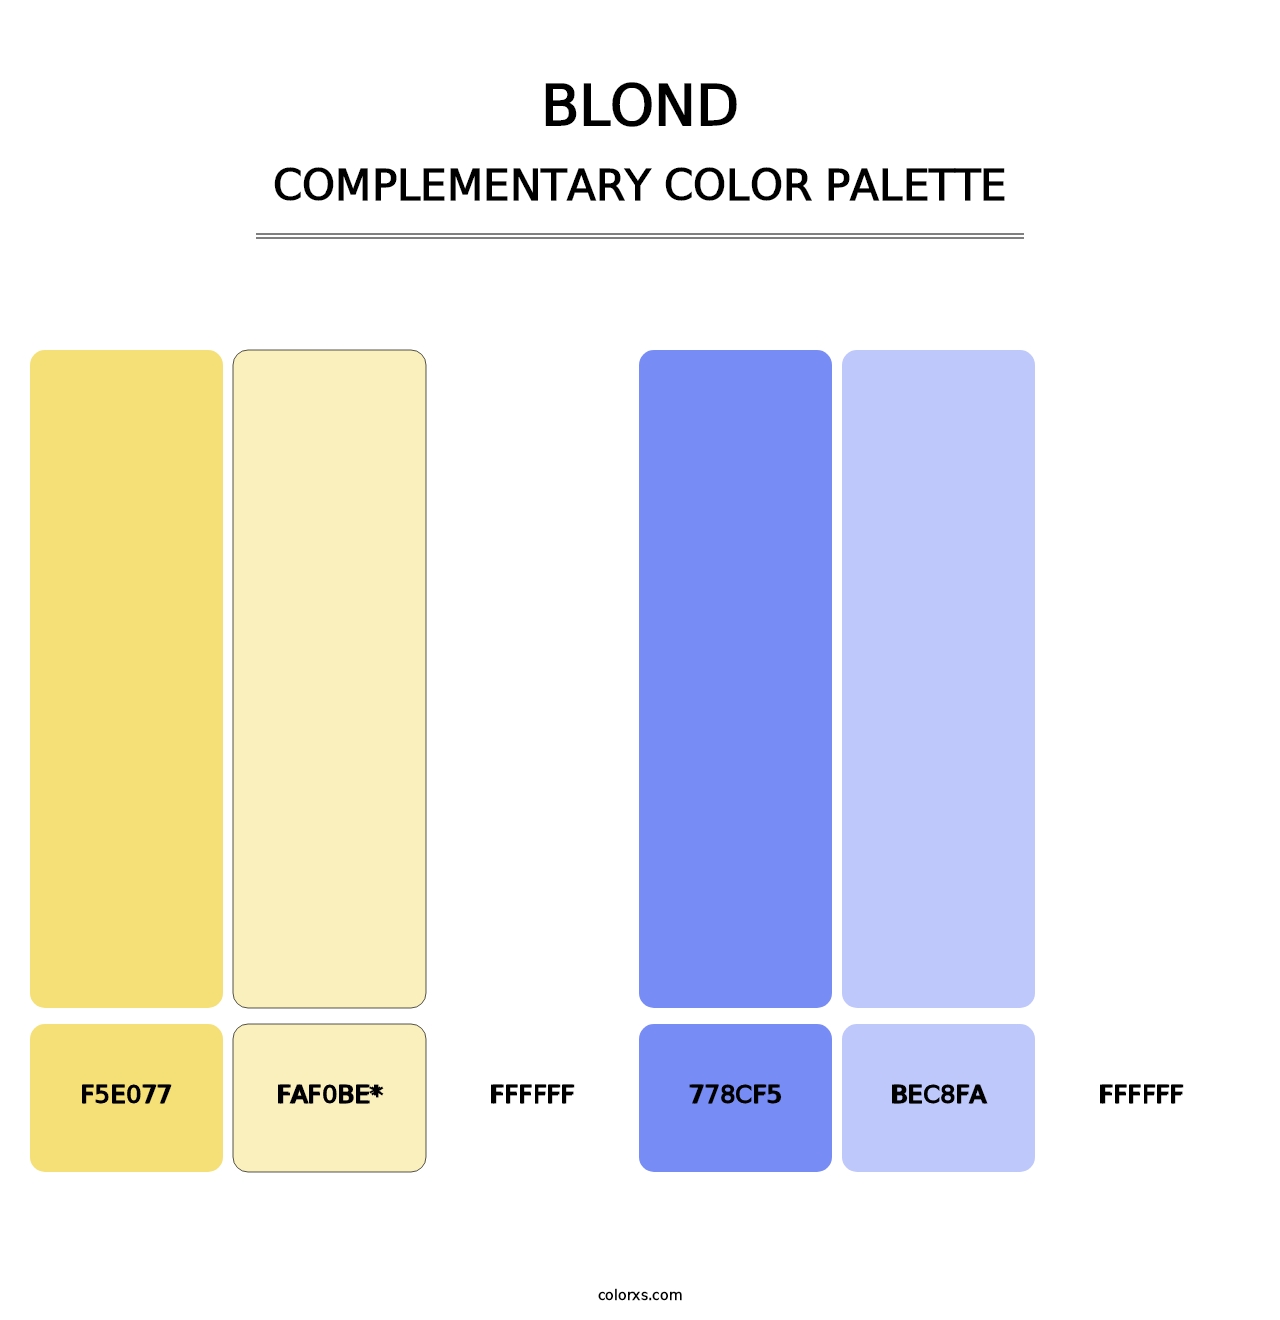 Blond - Complementary Color Palette